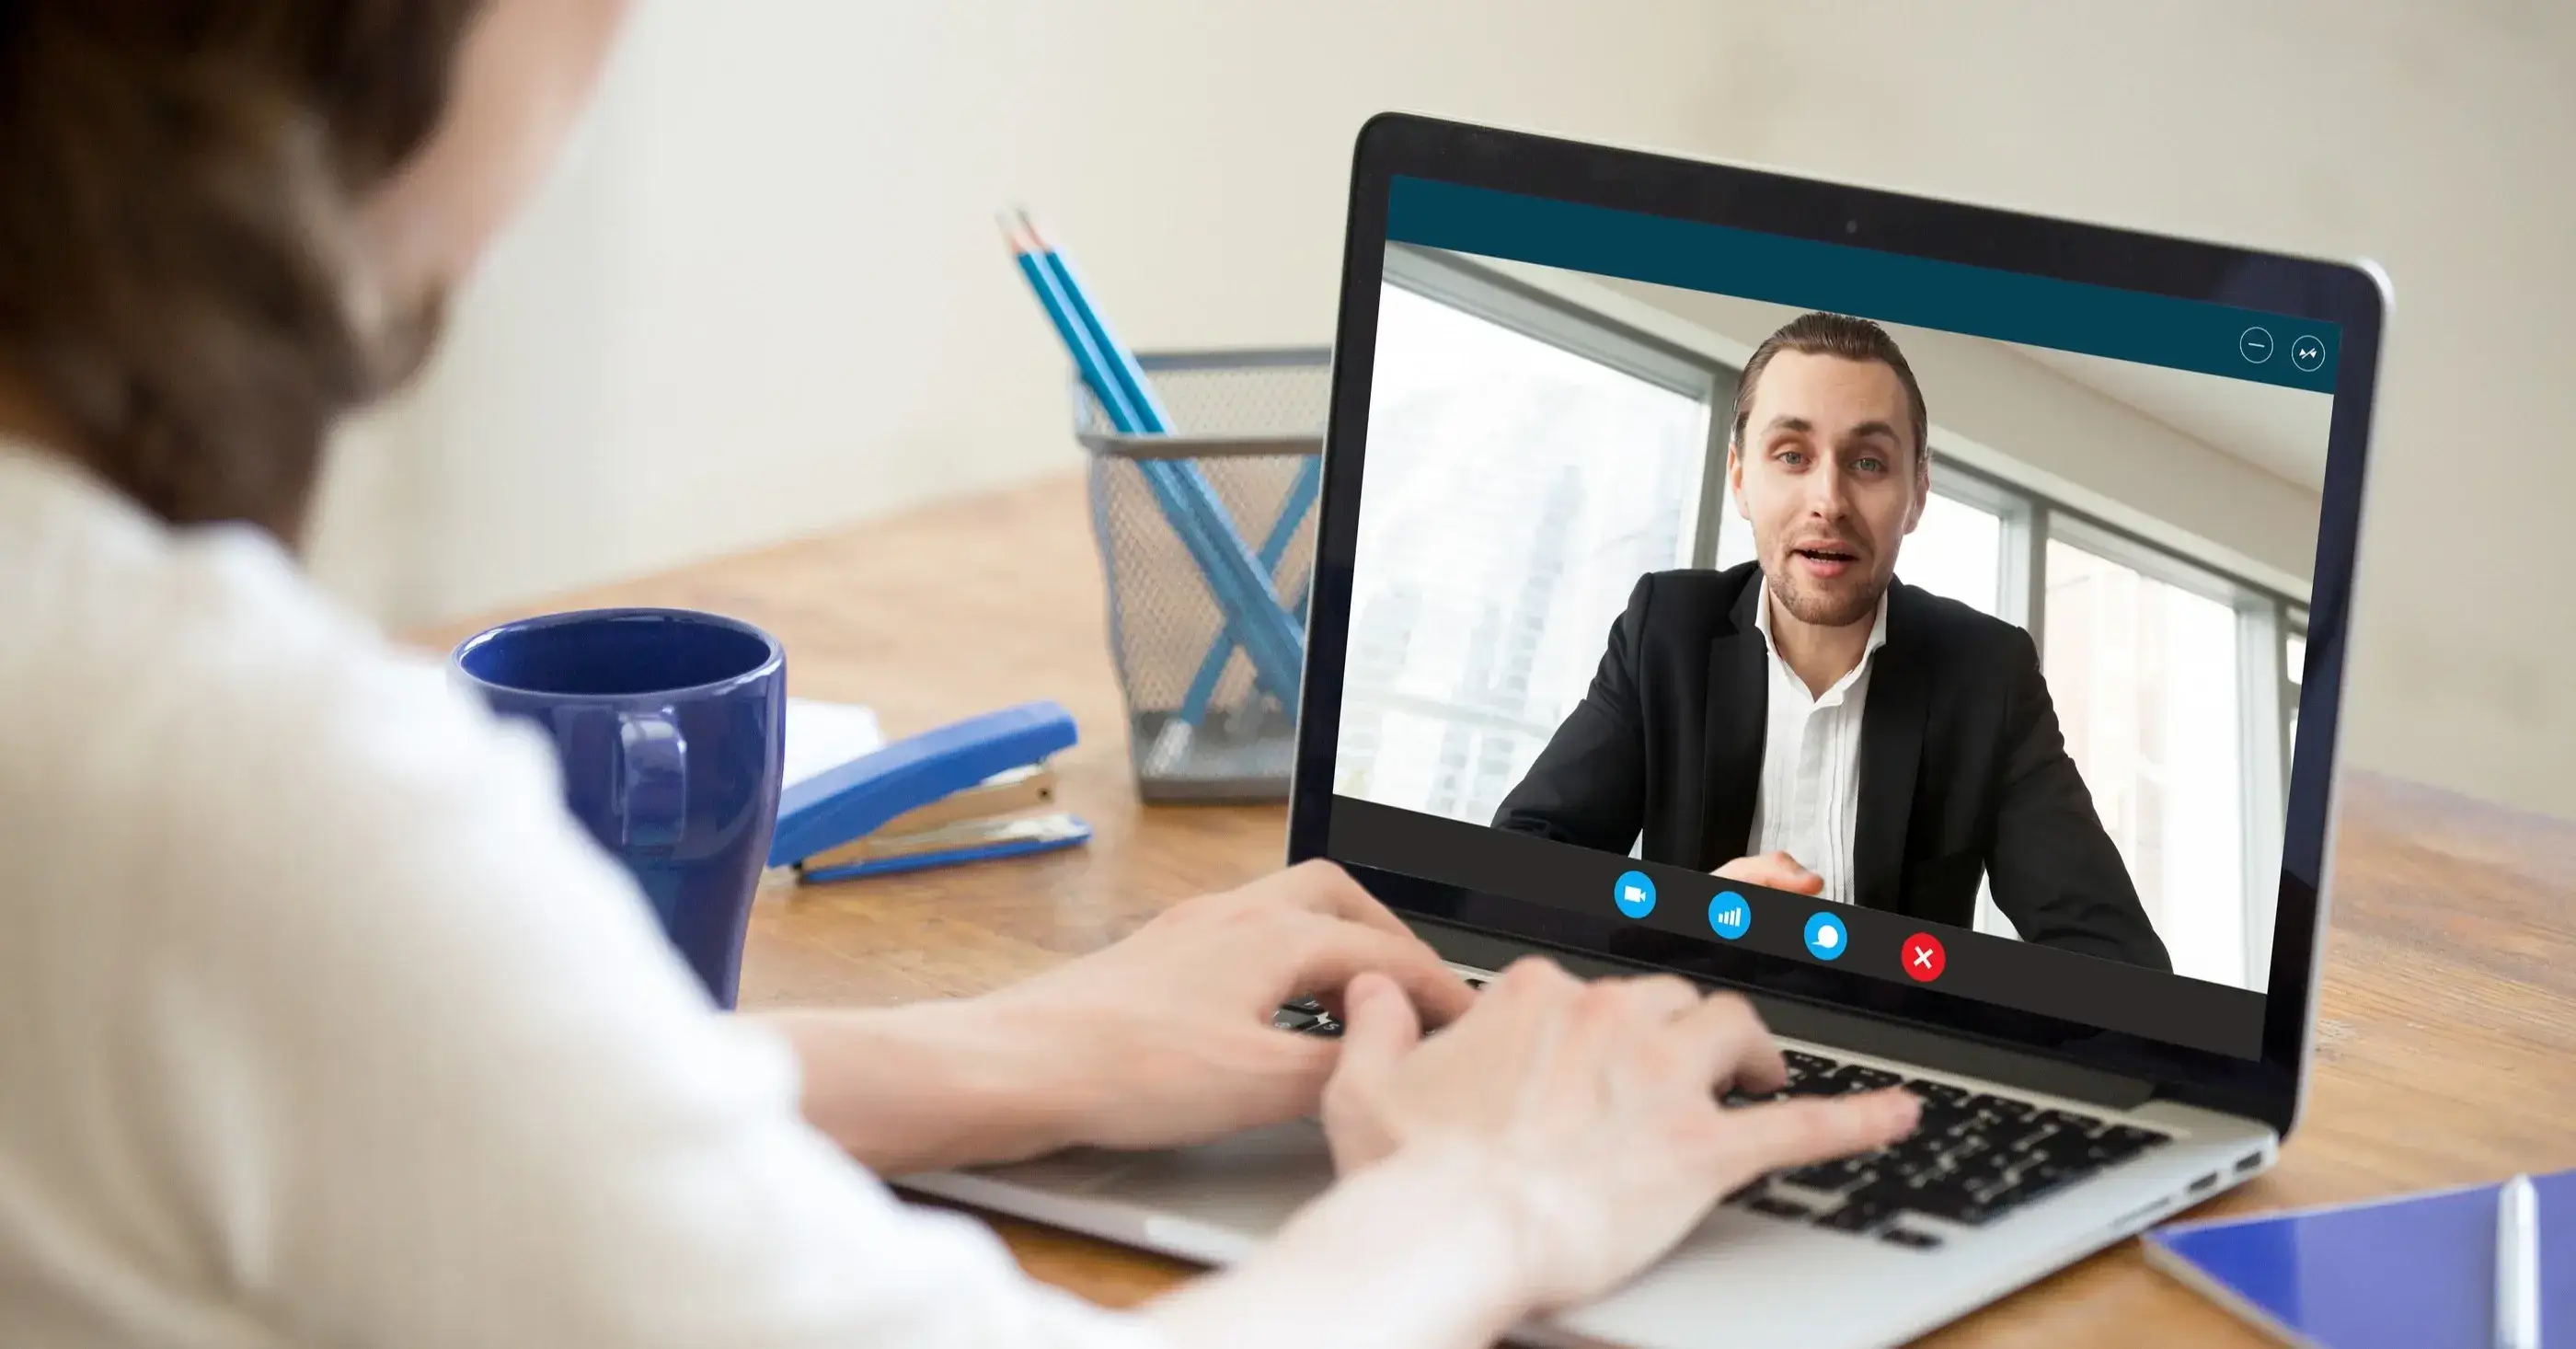 COVID-19 Strategies: 4 Tips for Productive Virtual Meetings